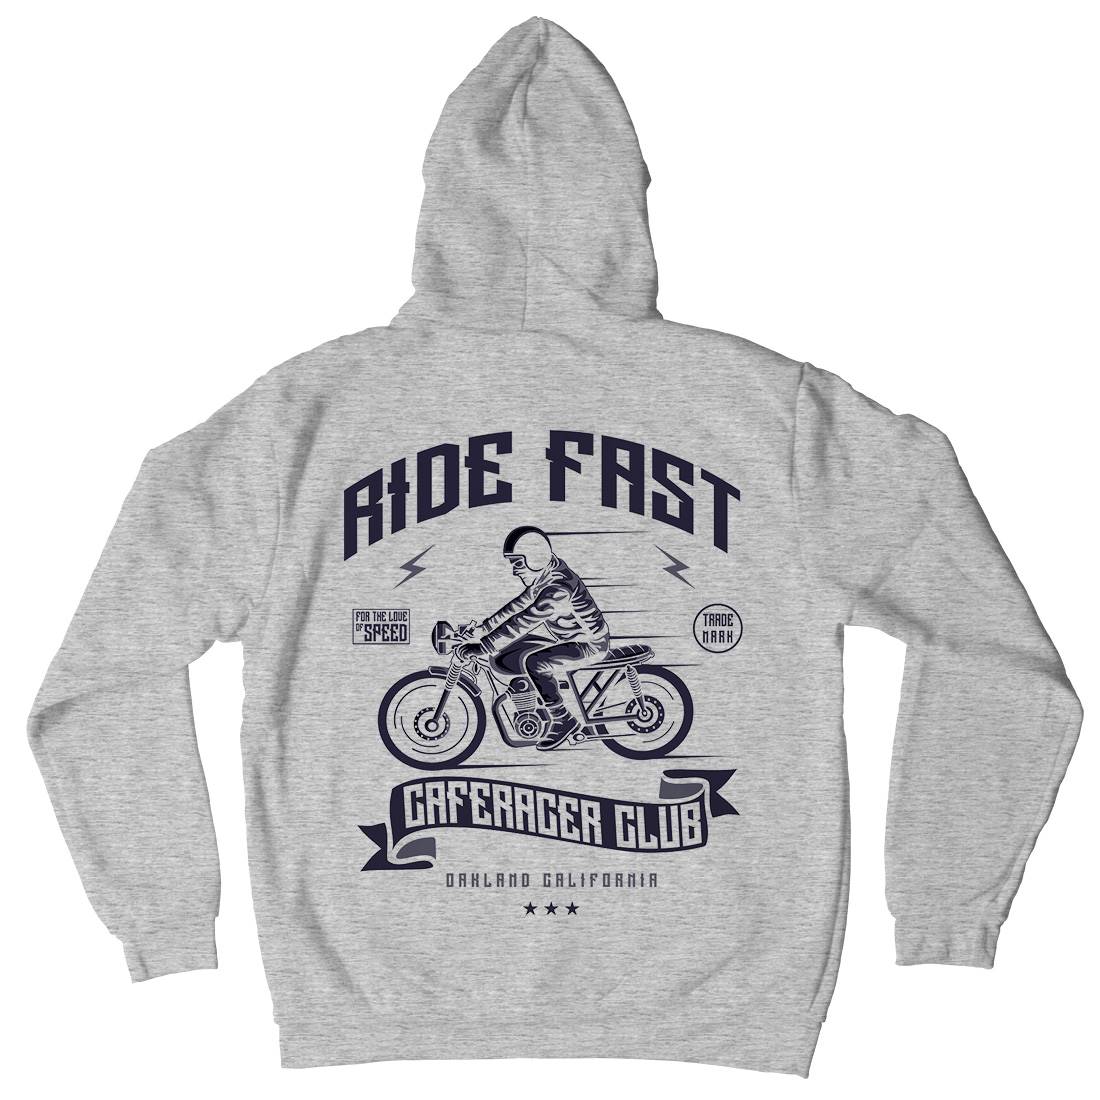 Ride Fast Mens Hoodie With Pocket Motorcycles A117